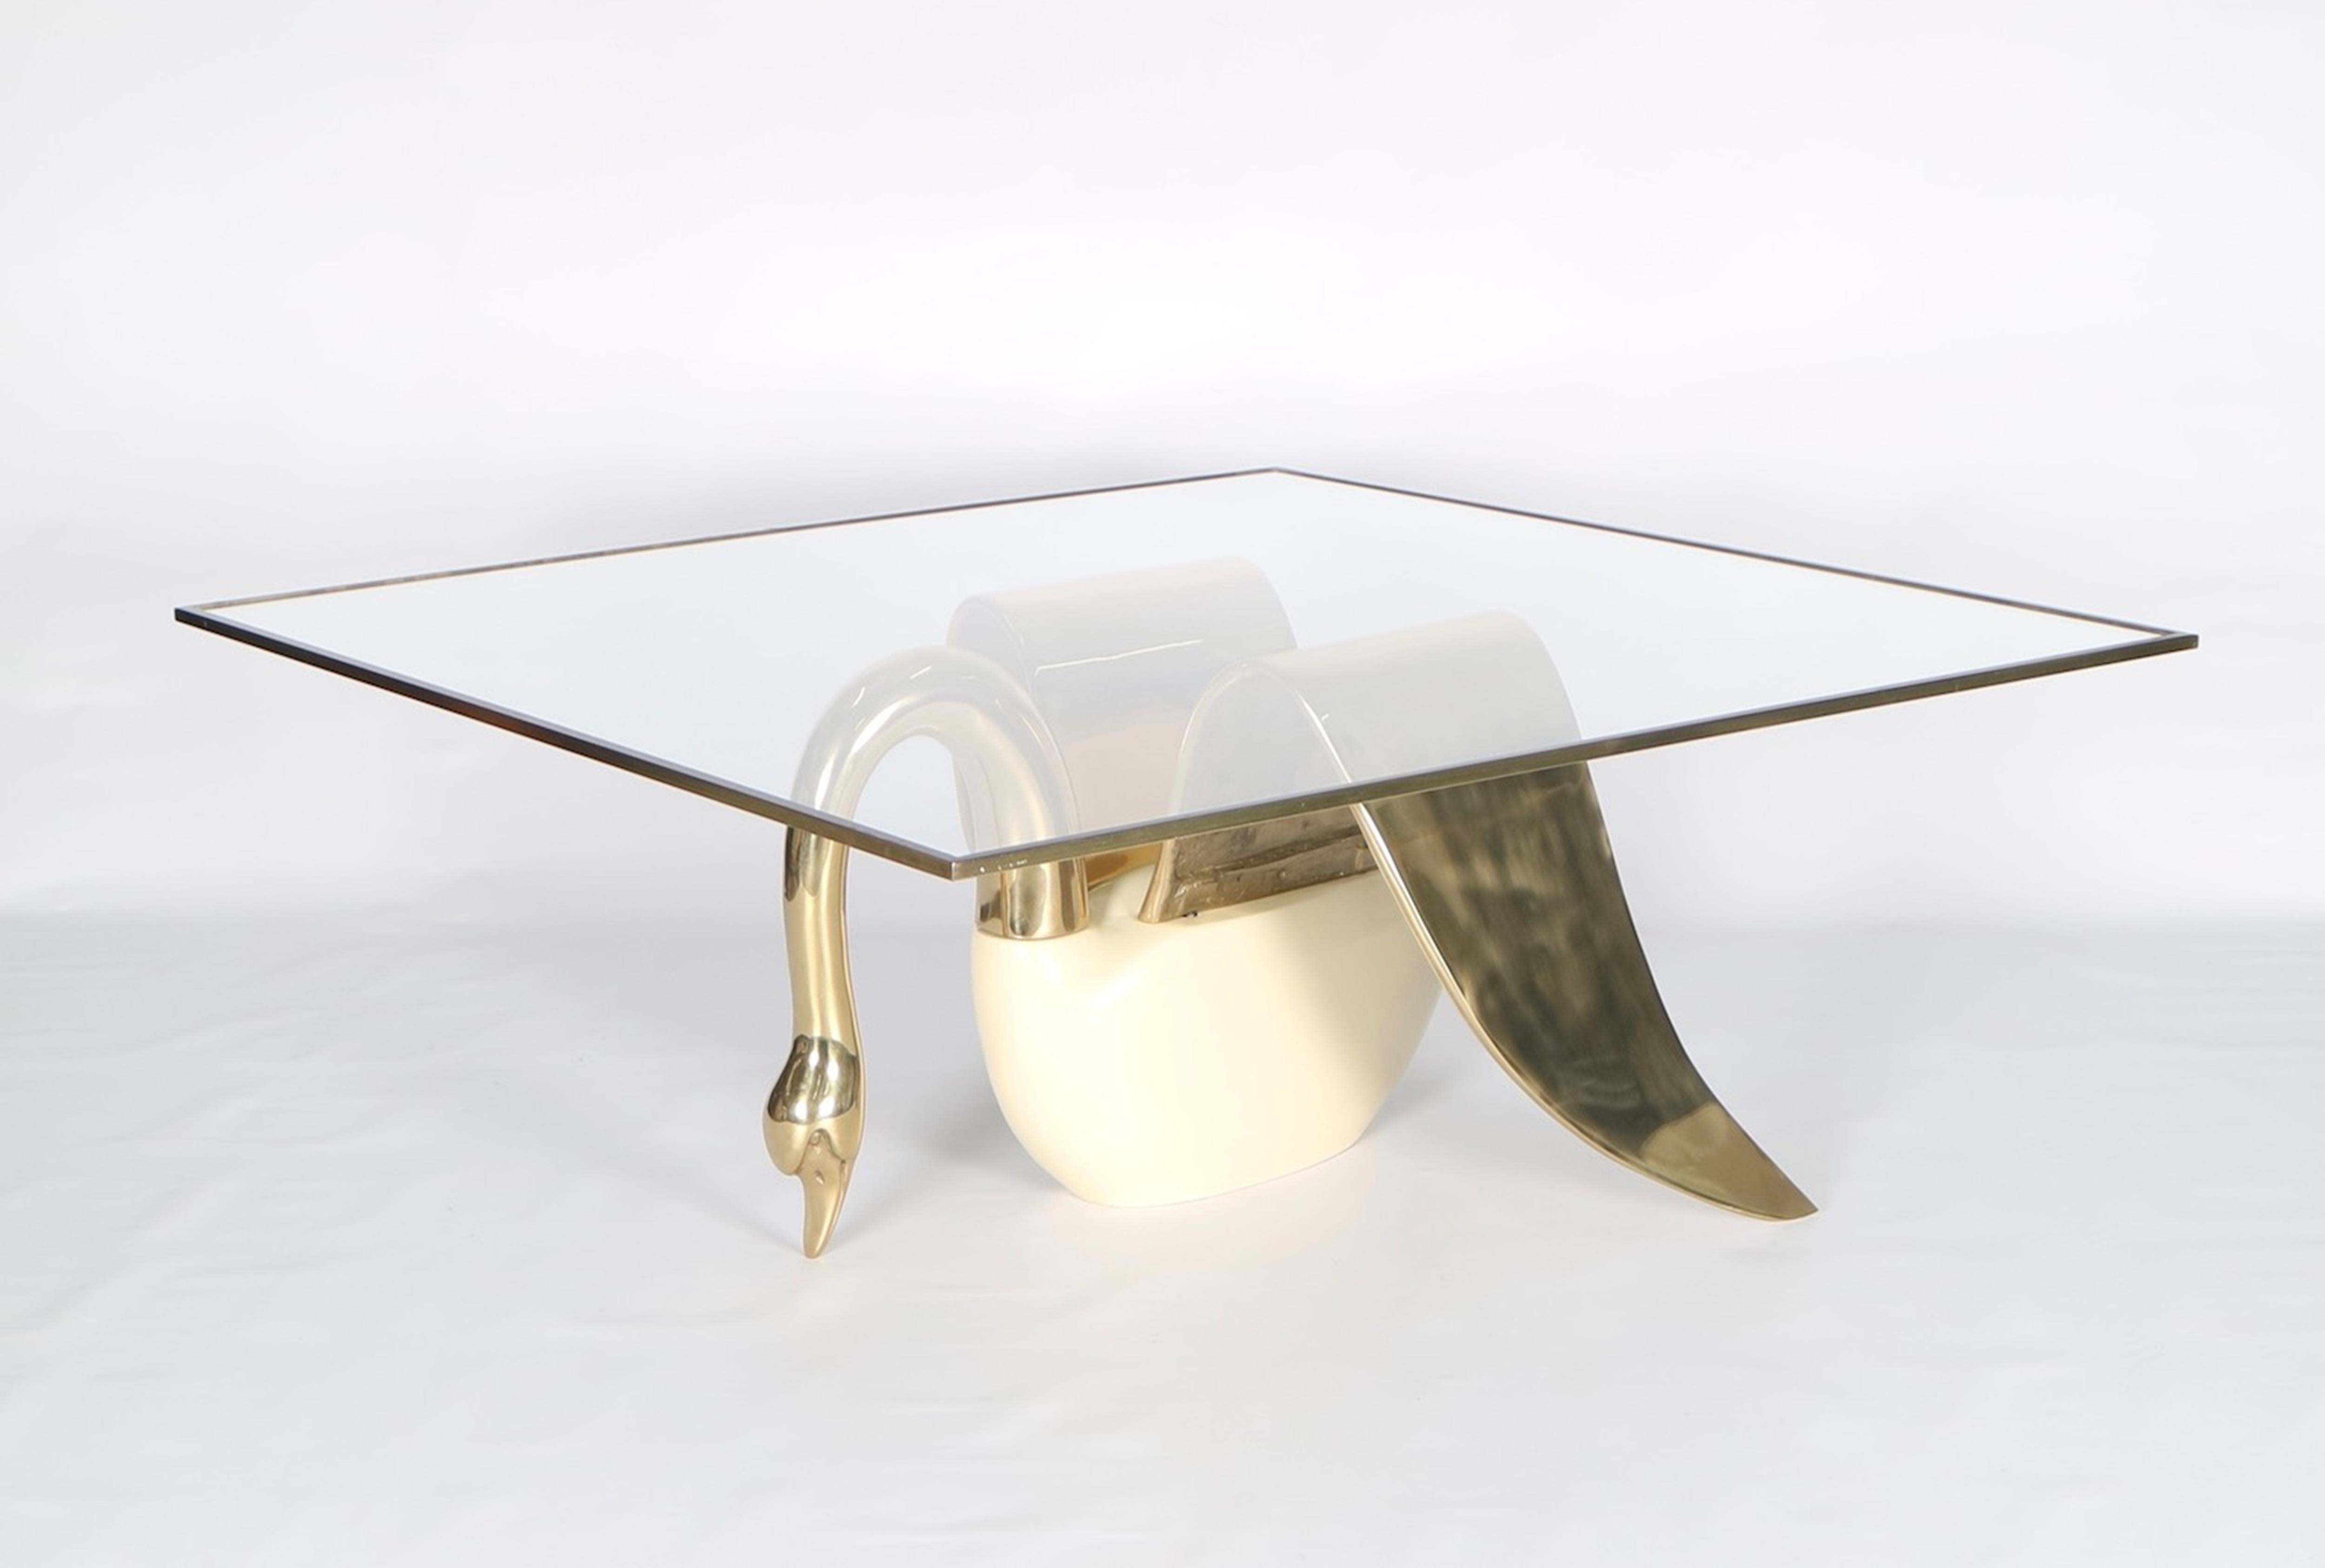 Hollywood Regency swan cocktail or coffee table in brass. Crafted in solid brass with lacquer wood body and square glass top with brass edges. The piece features a sculptural base in the shape of a seated swan with outstretched wings. Wear